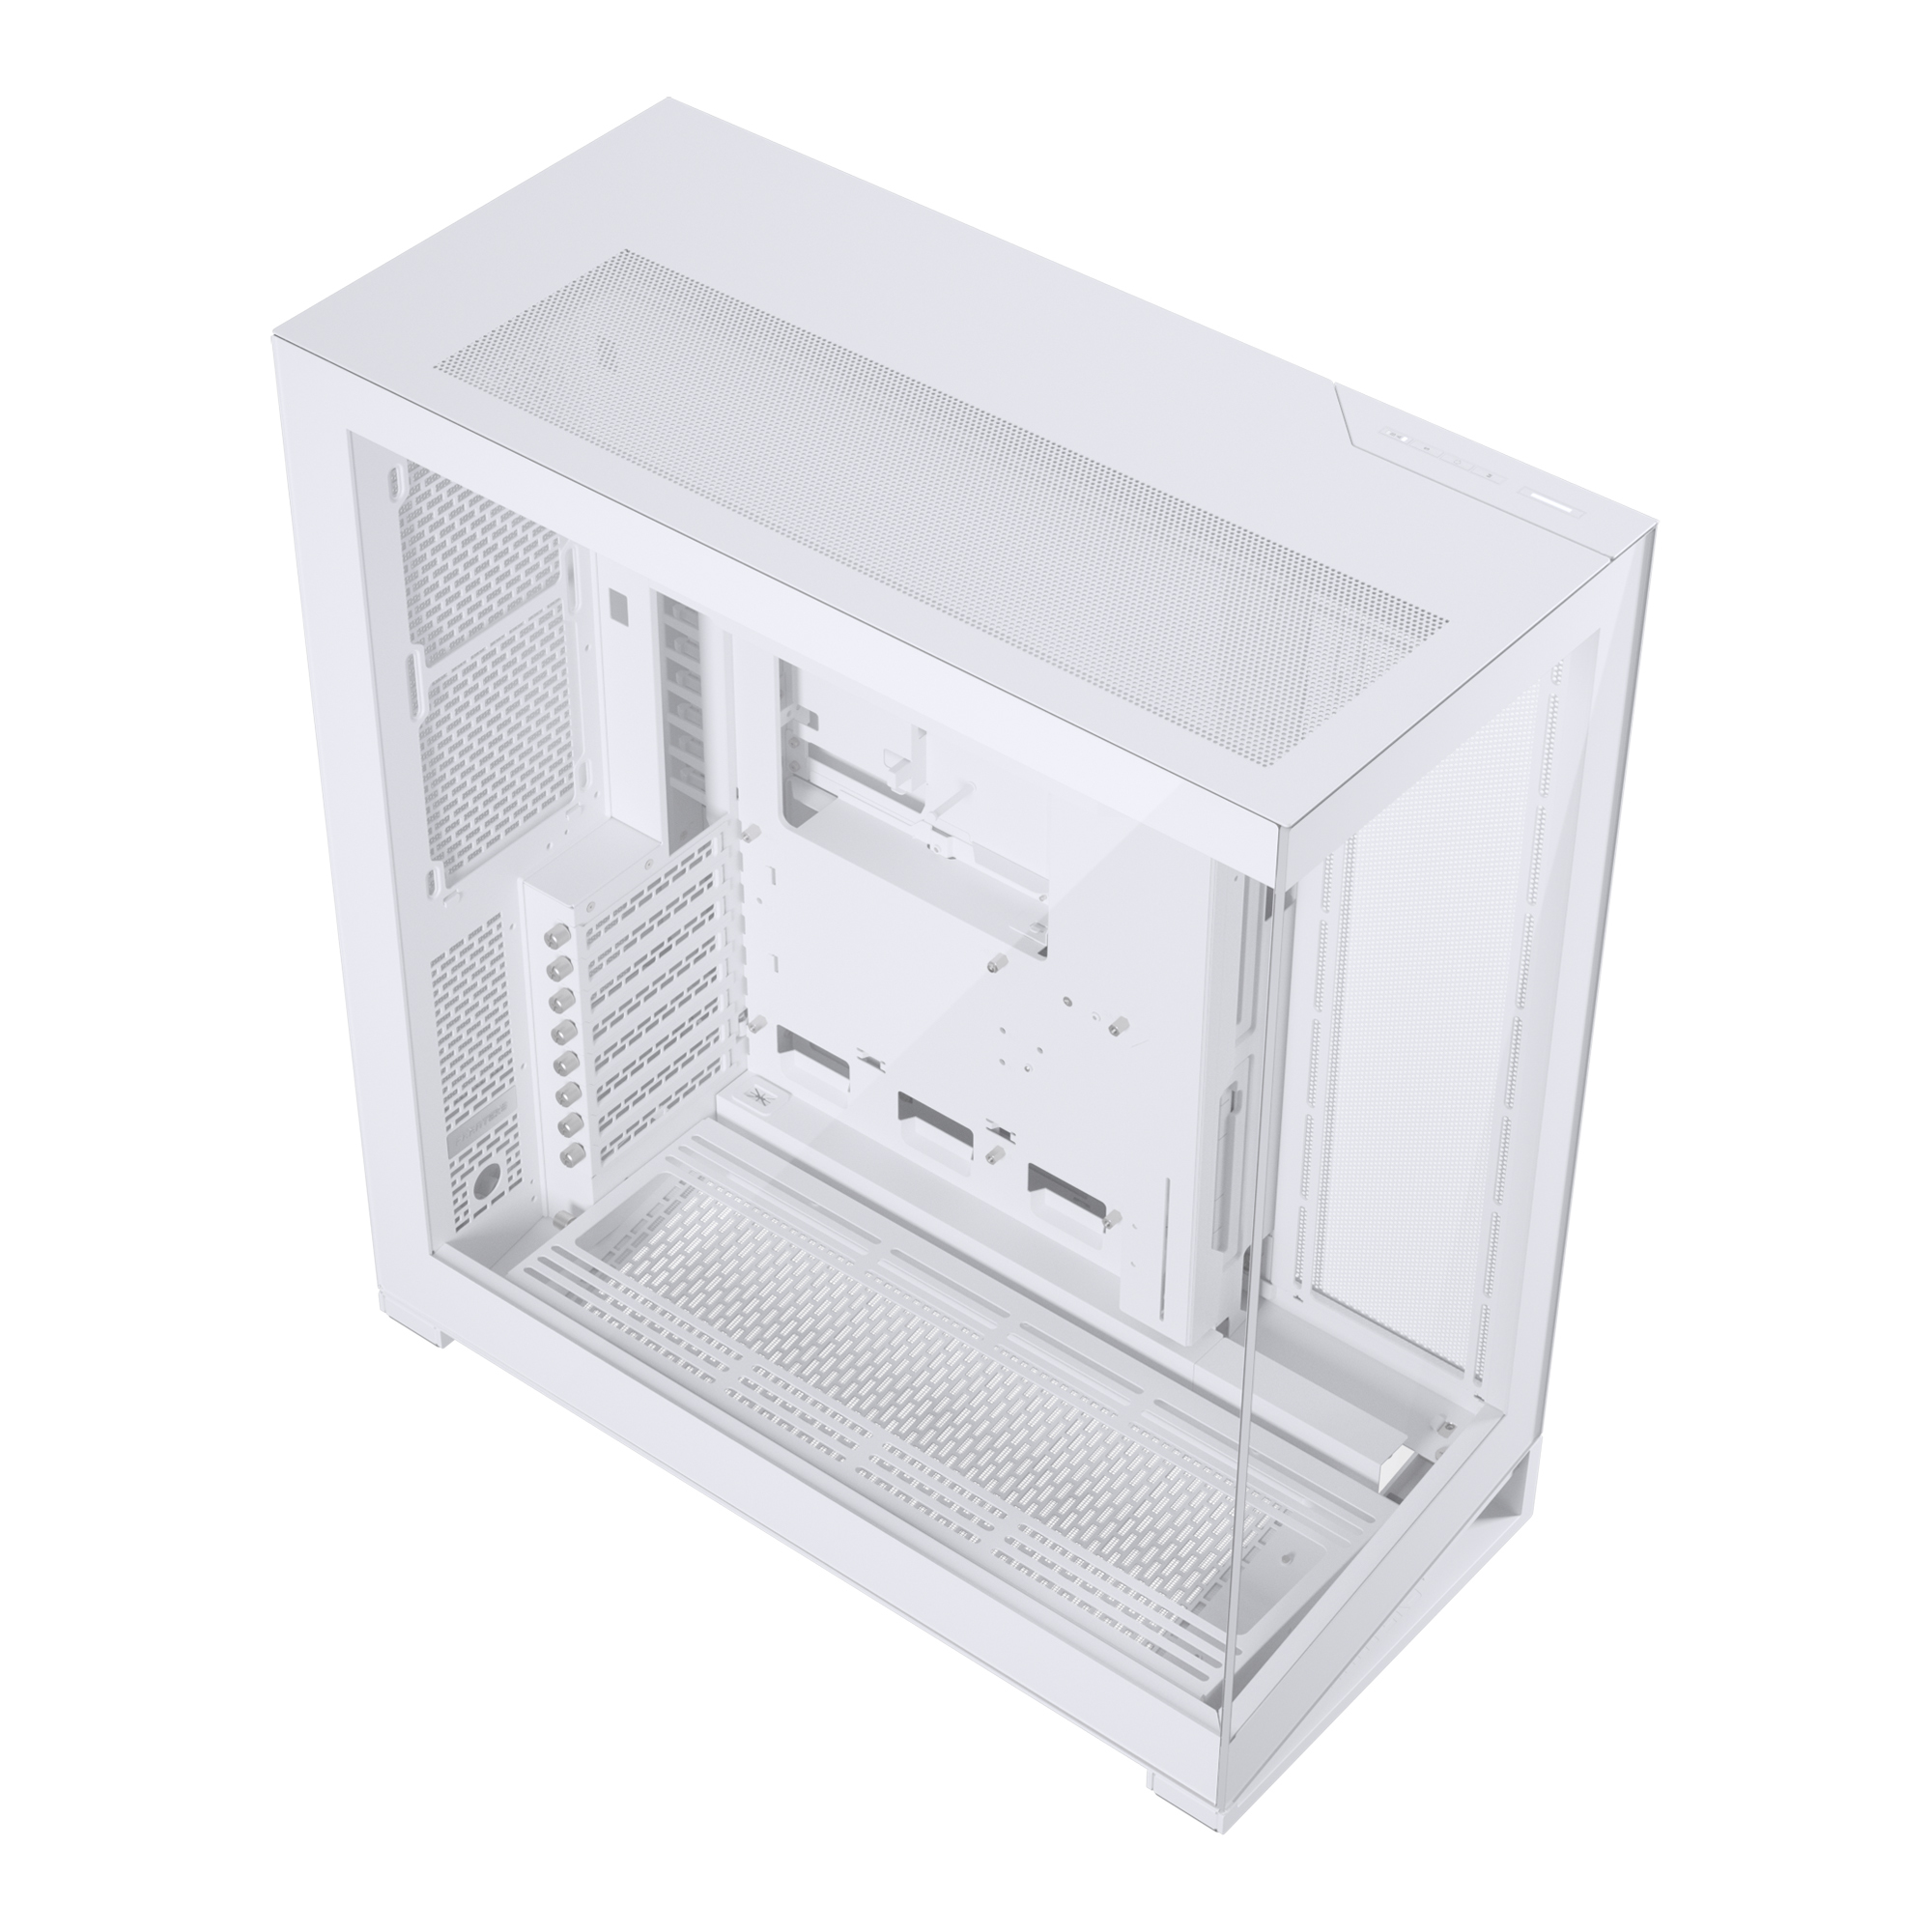  Phanteks (PH-NV723TG_DMW01) NV7 Showcase Full-Tower Chassis,  High Airflow Performance, Integrated D/A-RGB Lighting, Seamless Tempered  Glass Design, 12 Fan Positions, Matte White : Everything Else